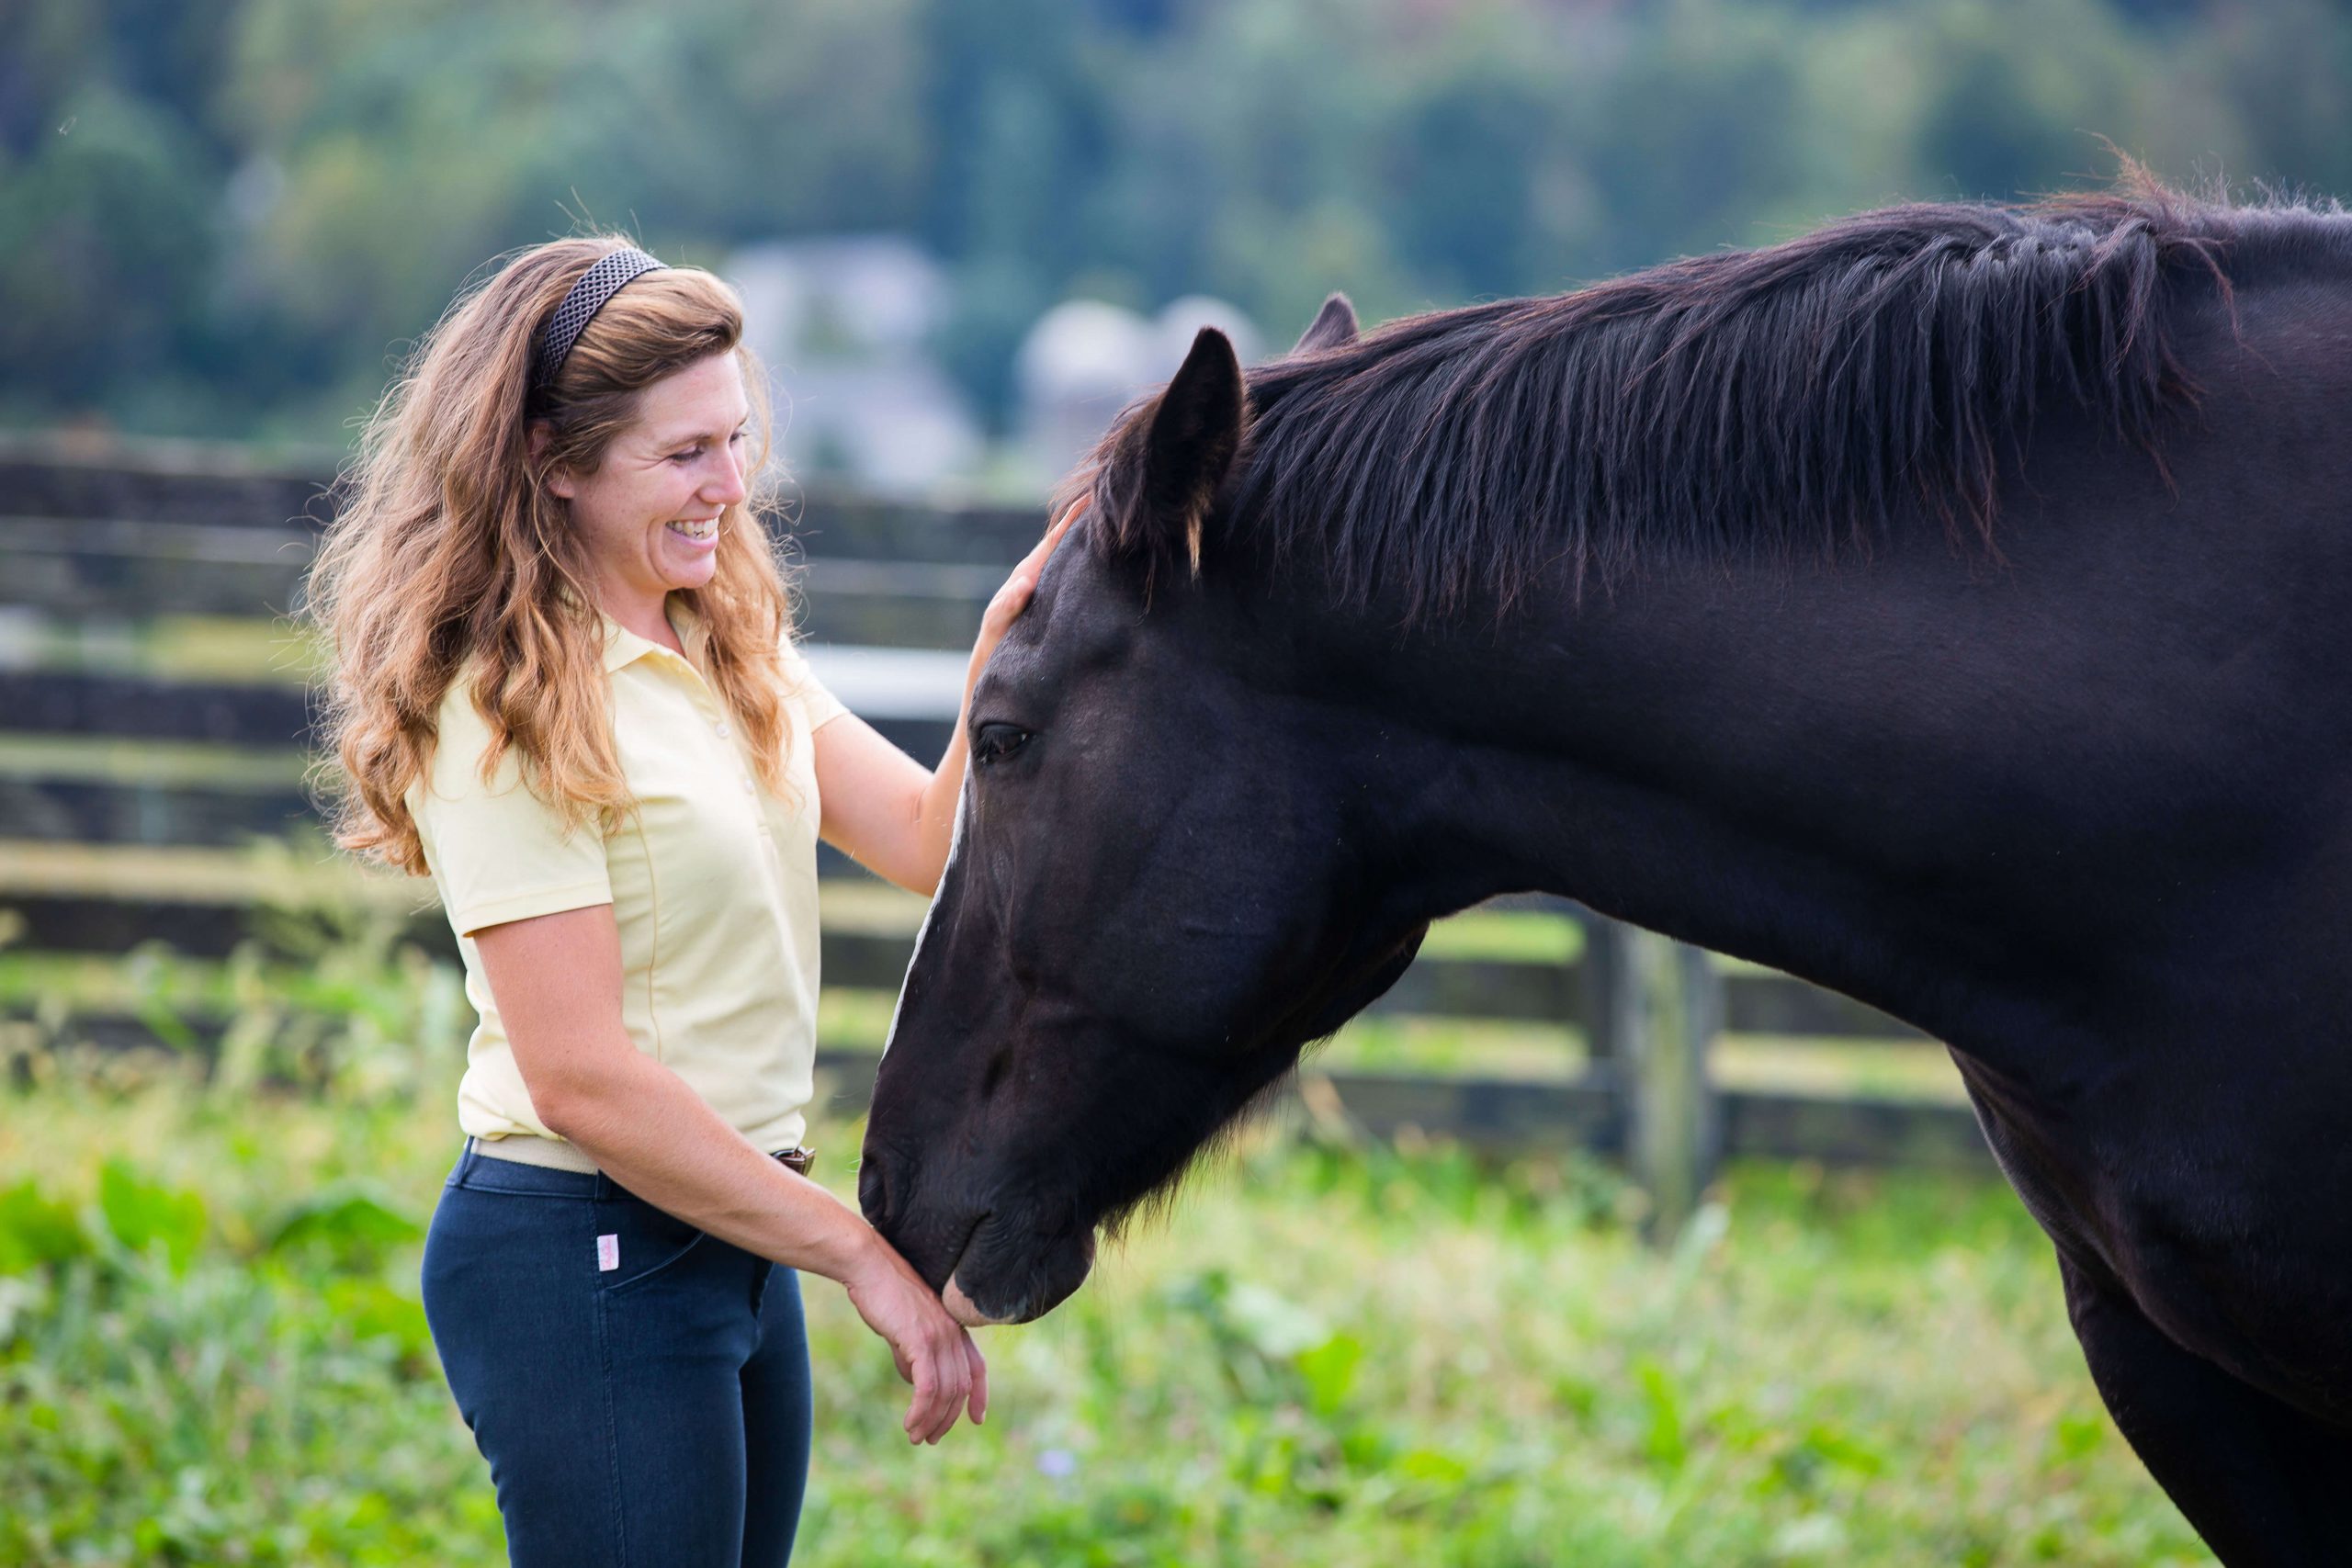 Are Dominance and Leadership Important in Horse Training?